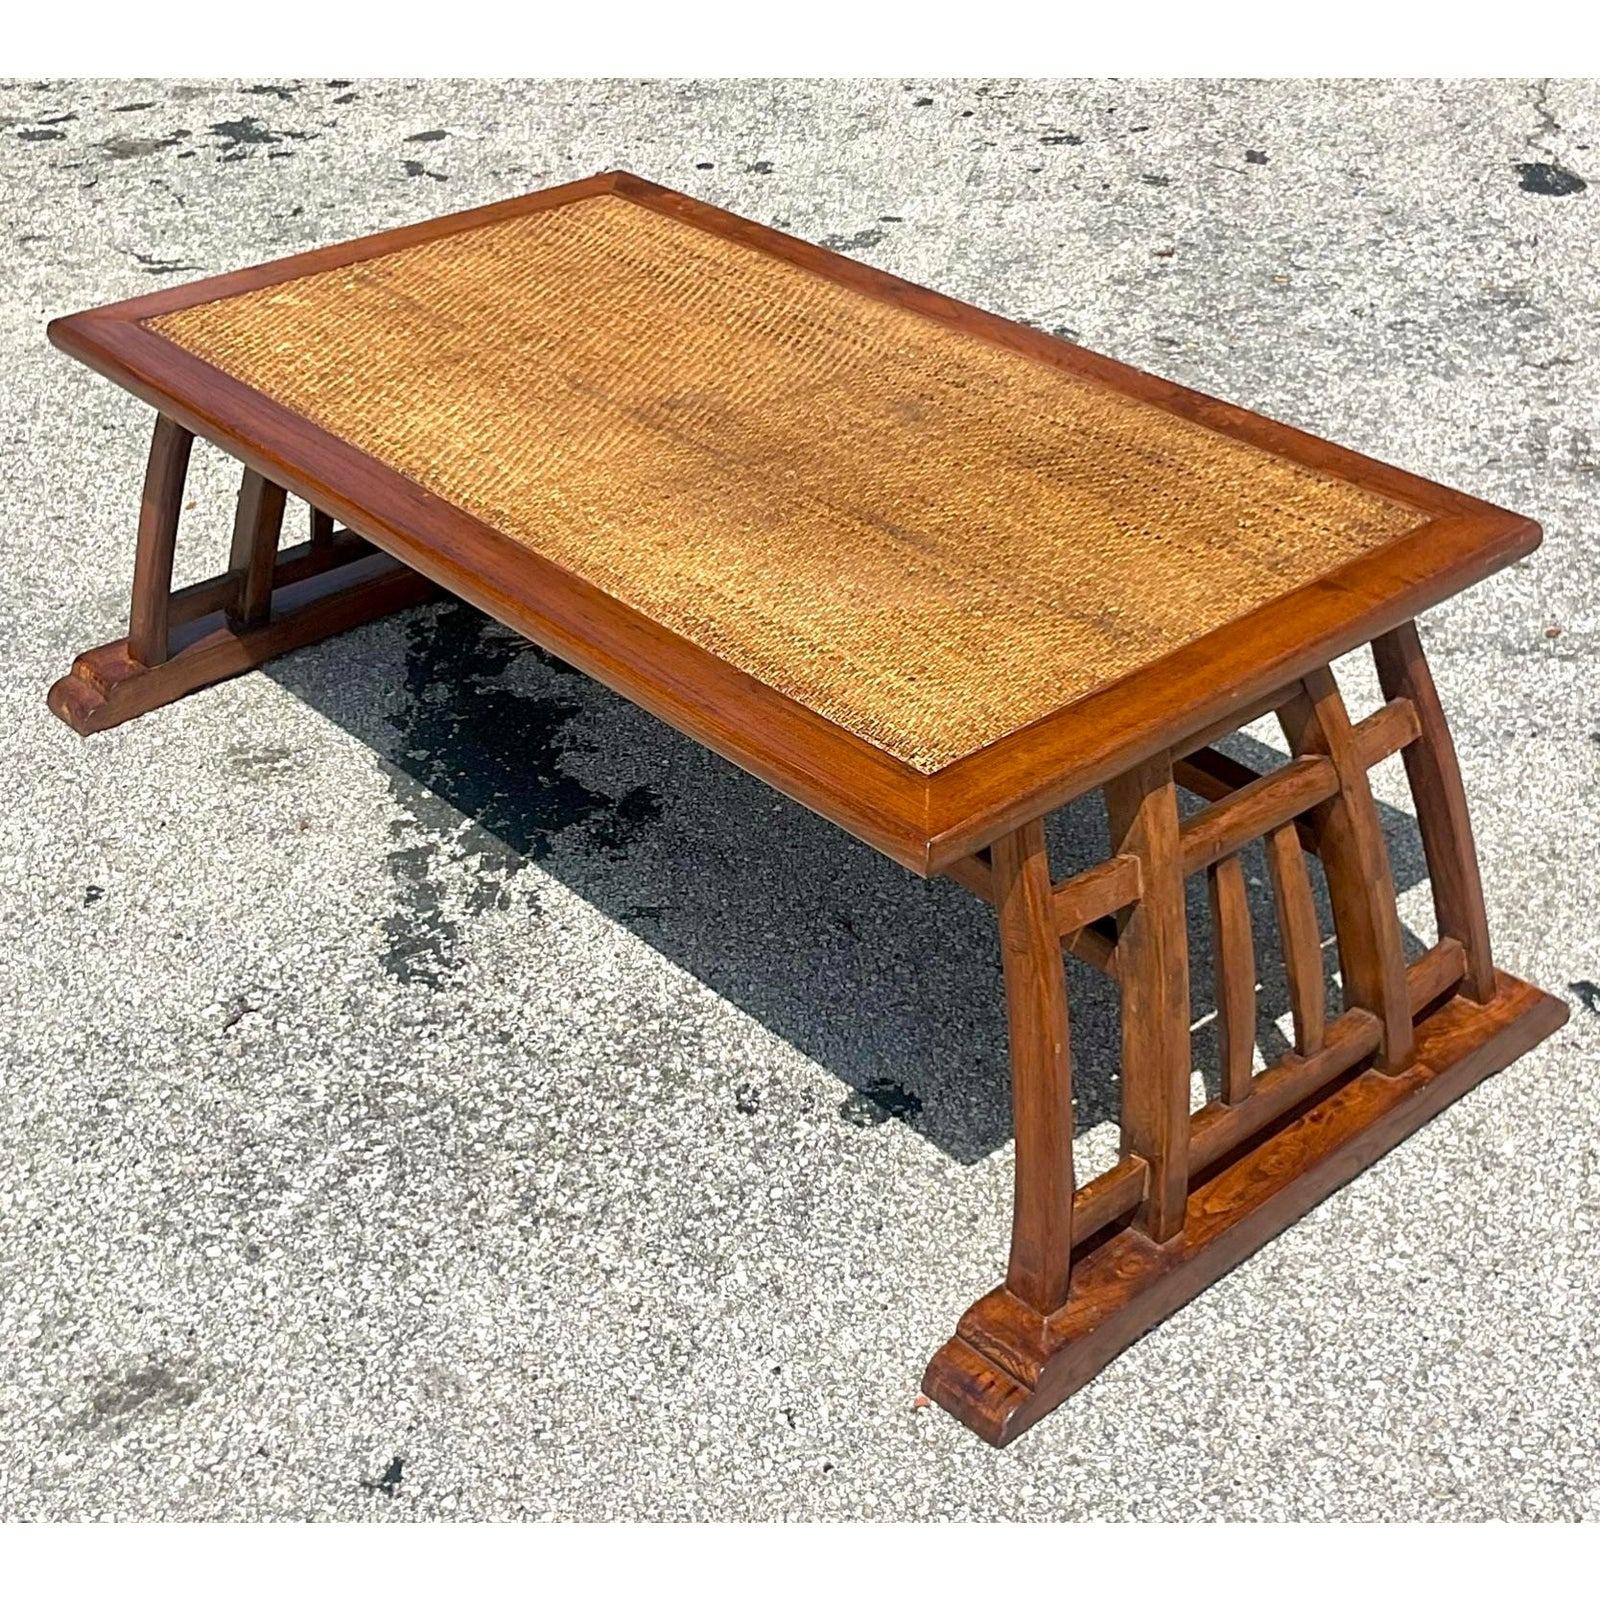 North American Late 20th Century Vintage Coastal Teak Coffee Table With Woven Rattan Panel For Sale